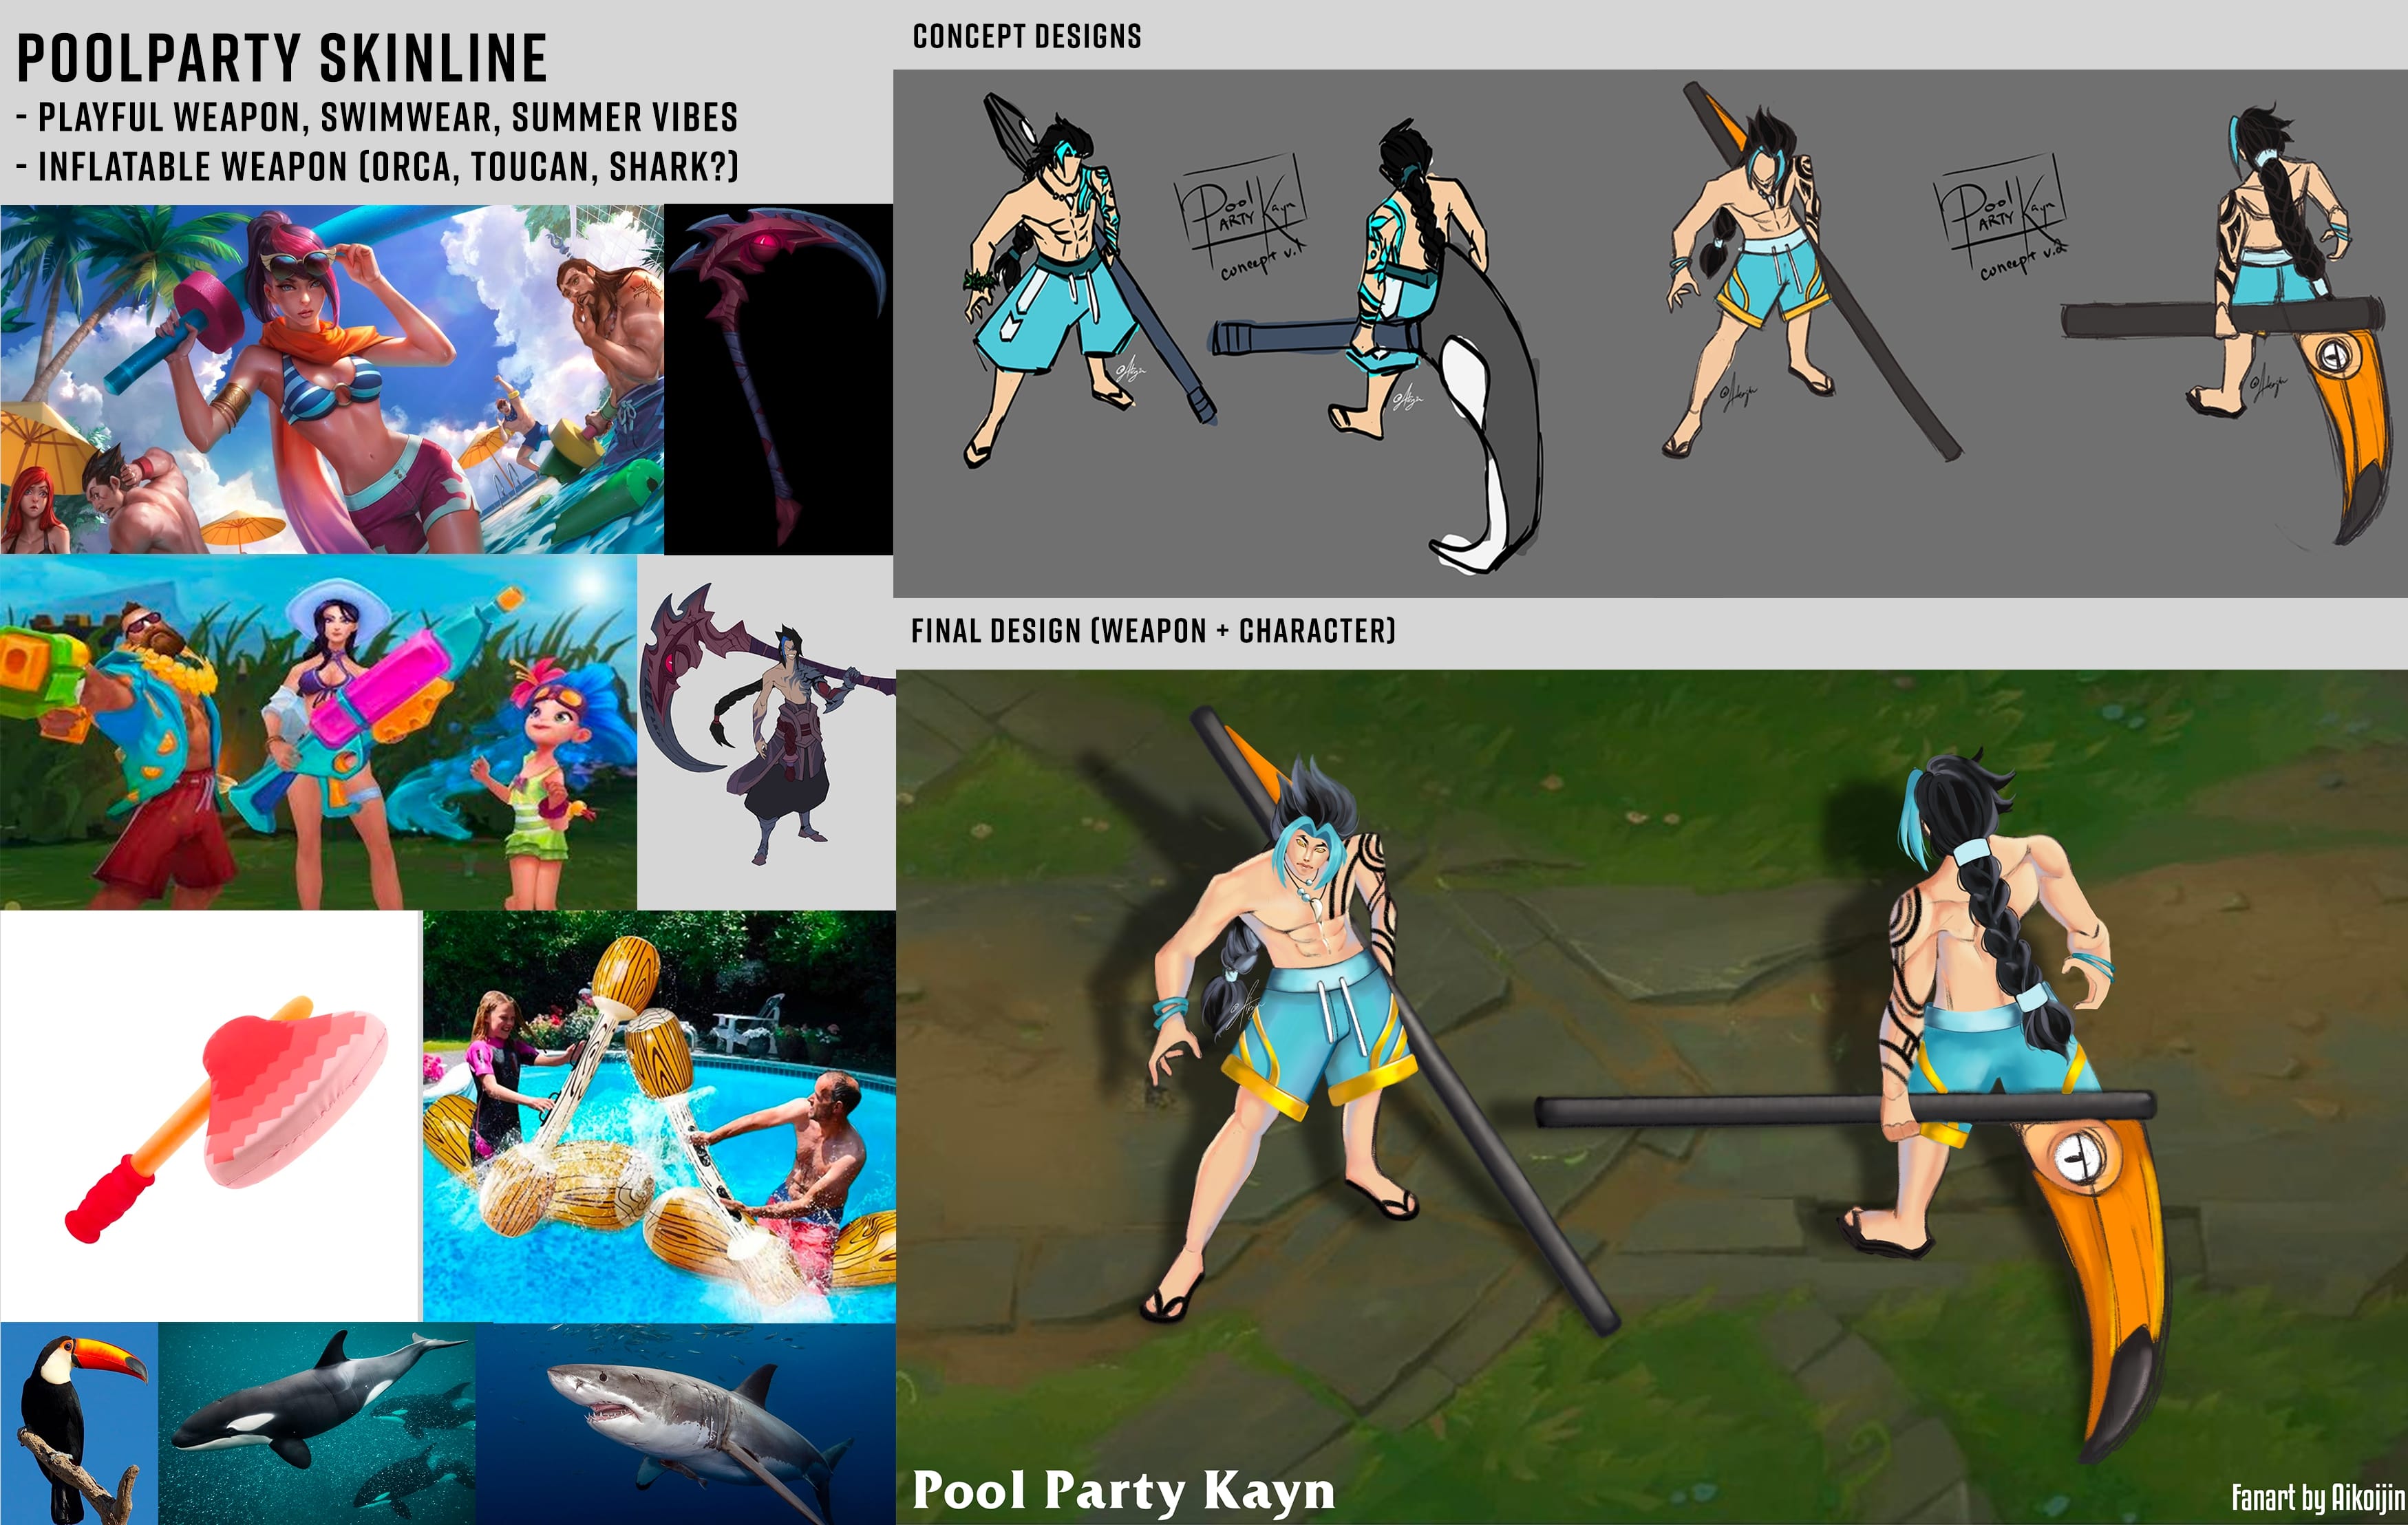 In this concept, I wanted to play around with the old pool party skinline with their weapons being a playful toy you would see kids playing around with at a peach: ex. water guns, foam pool swords, etc. I loved the idea of the inflatable toys like swords, axes, etc and wanted to make one for Kayn since he is all edge and giving him an inflatable toy as Rhaast was just fitting. || I decided to explore the shark and orca to keep the idea of apex predator but realized later on a Toucan would be more fitting with the bright orange contrasting with the blues and gold of the swim trunks. I also found it suited better since a toucan’s beak is originally curved and the idea of being hit by a toucan bird was just silly which was the feeling I was going for with the playful toy.